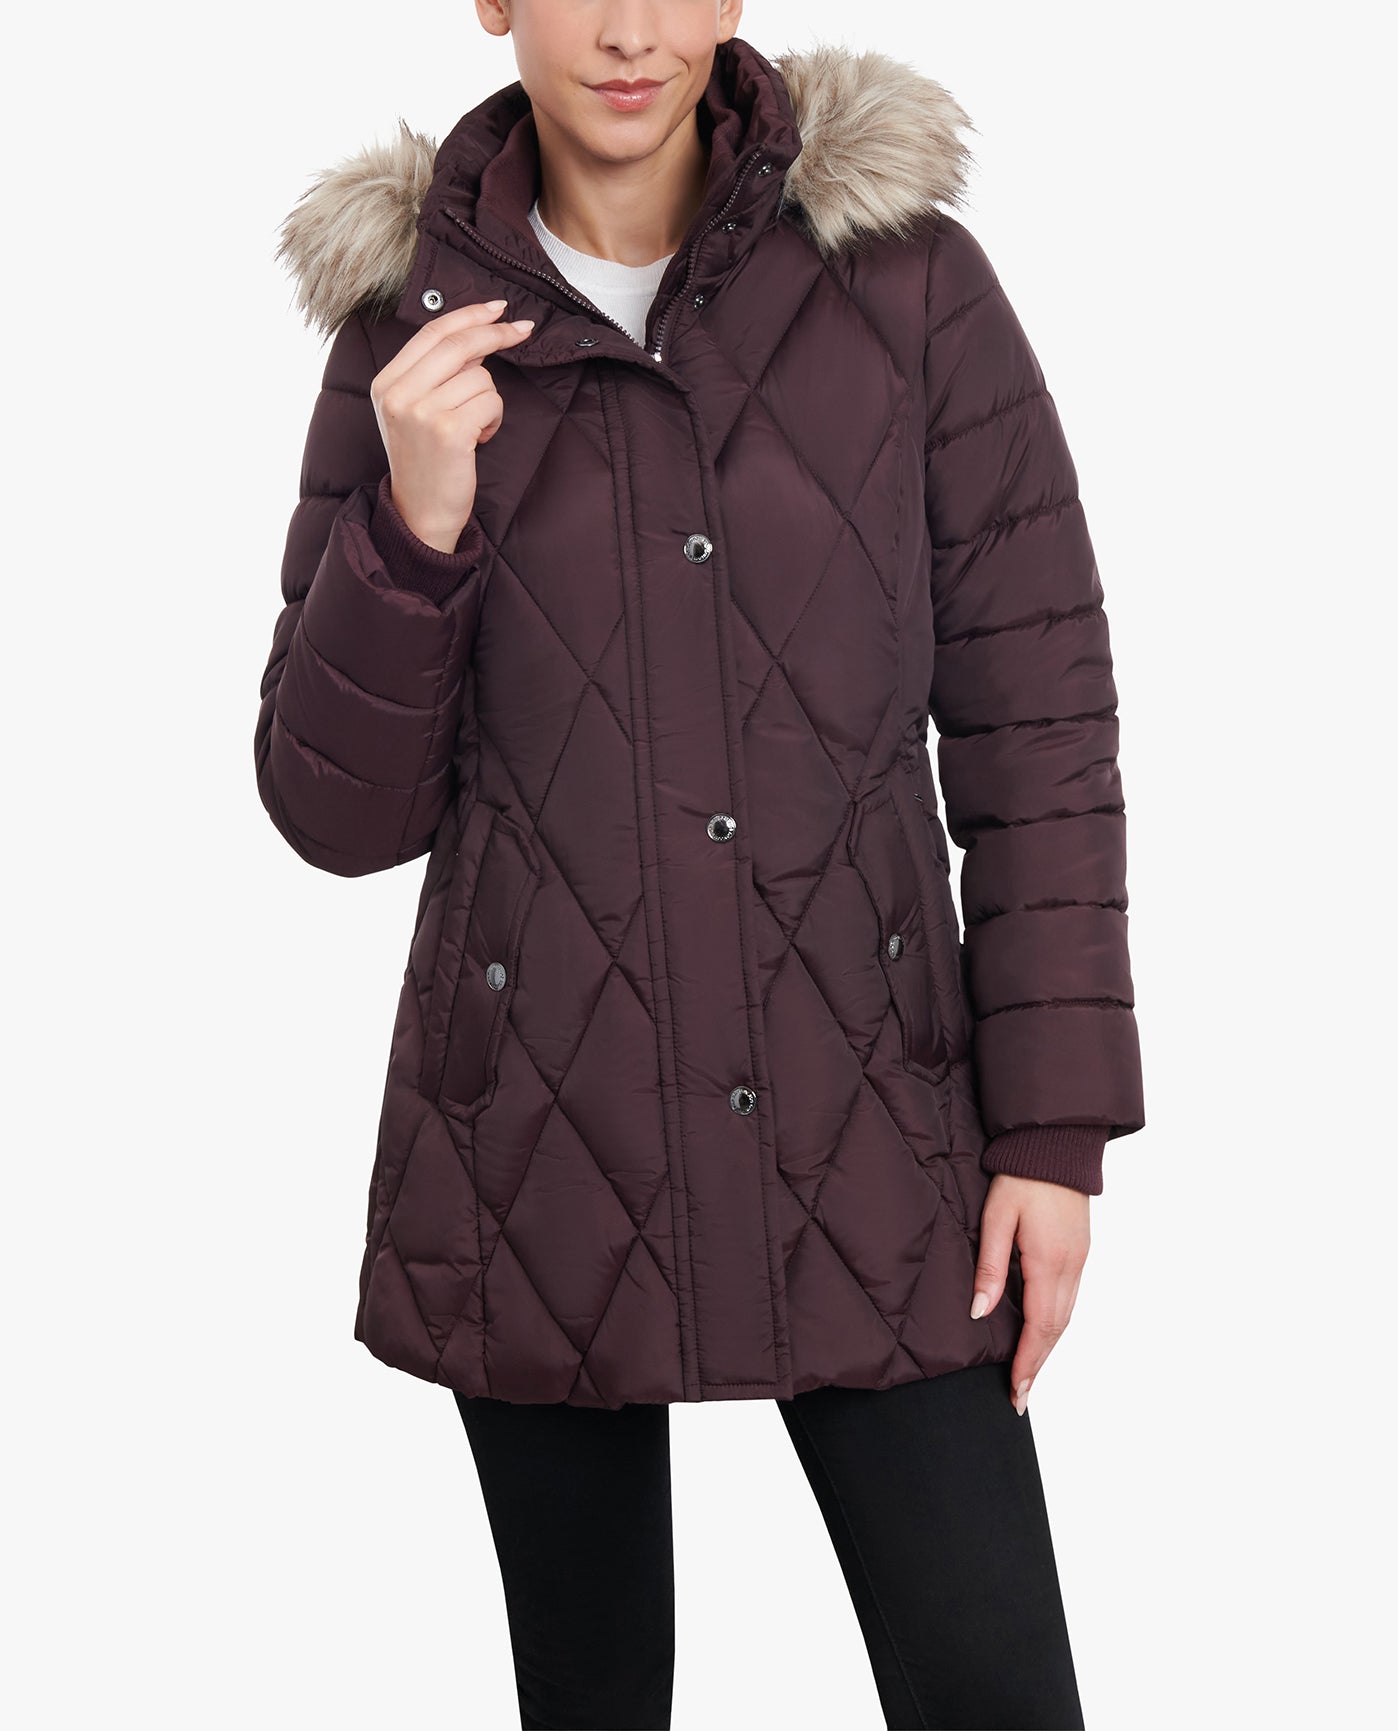 SIDE VIEW OF ZIP-FRONT DIAMOND QUILTED JACKET WITH ZIP-OFF FUR TRIM HOOD | BURGUNDY